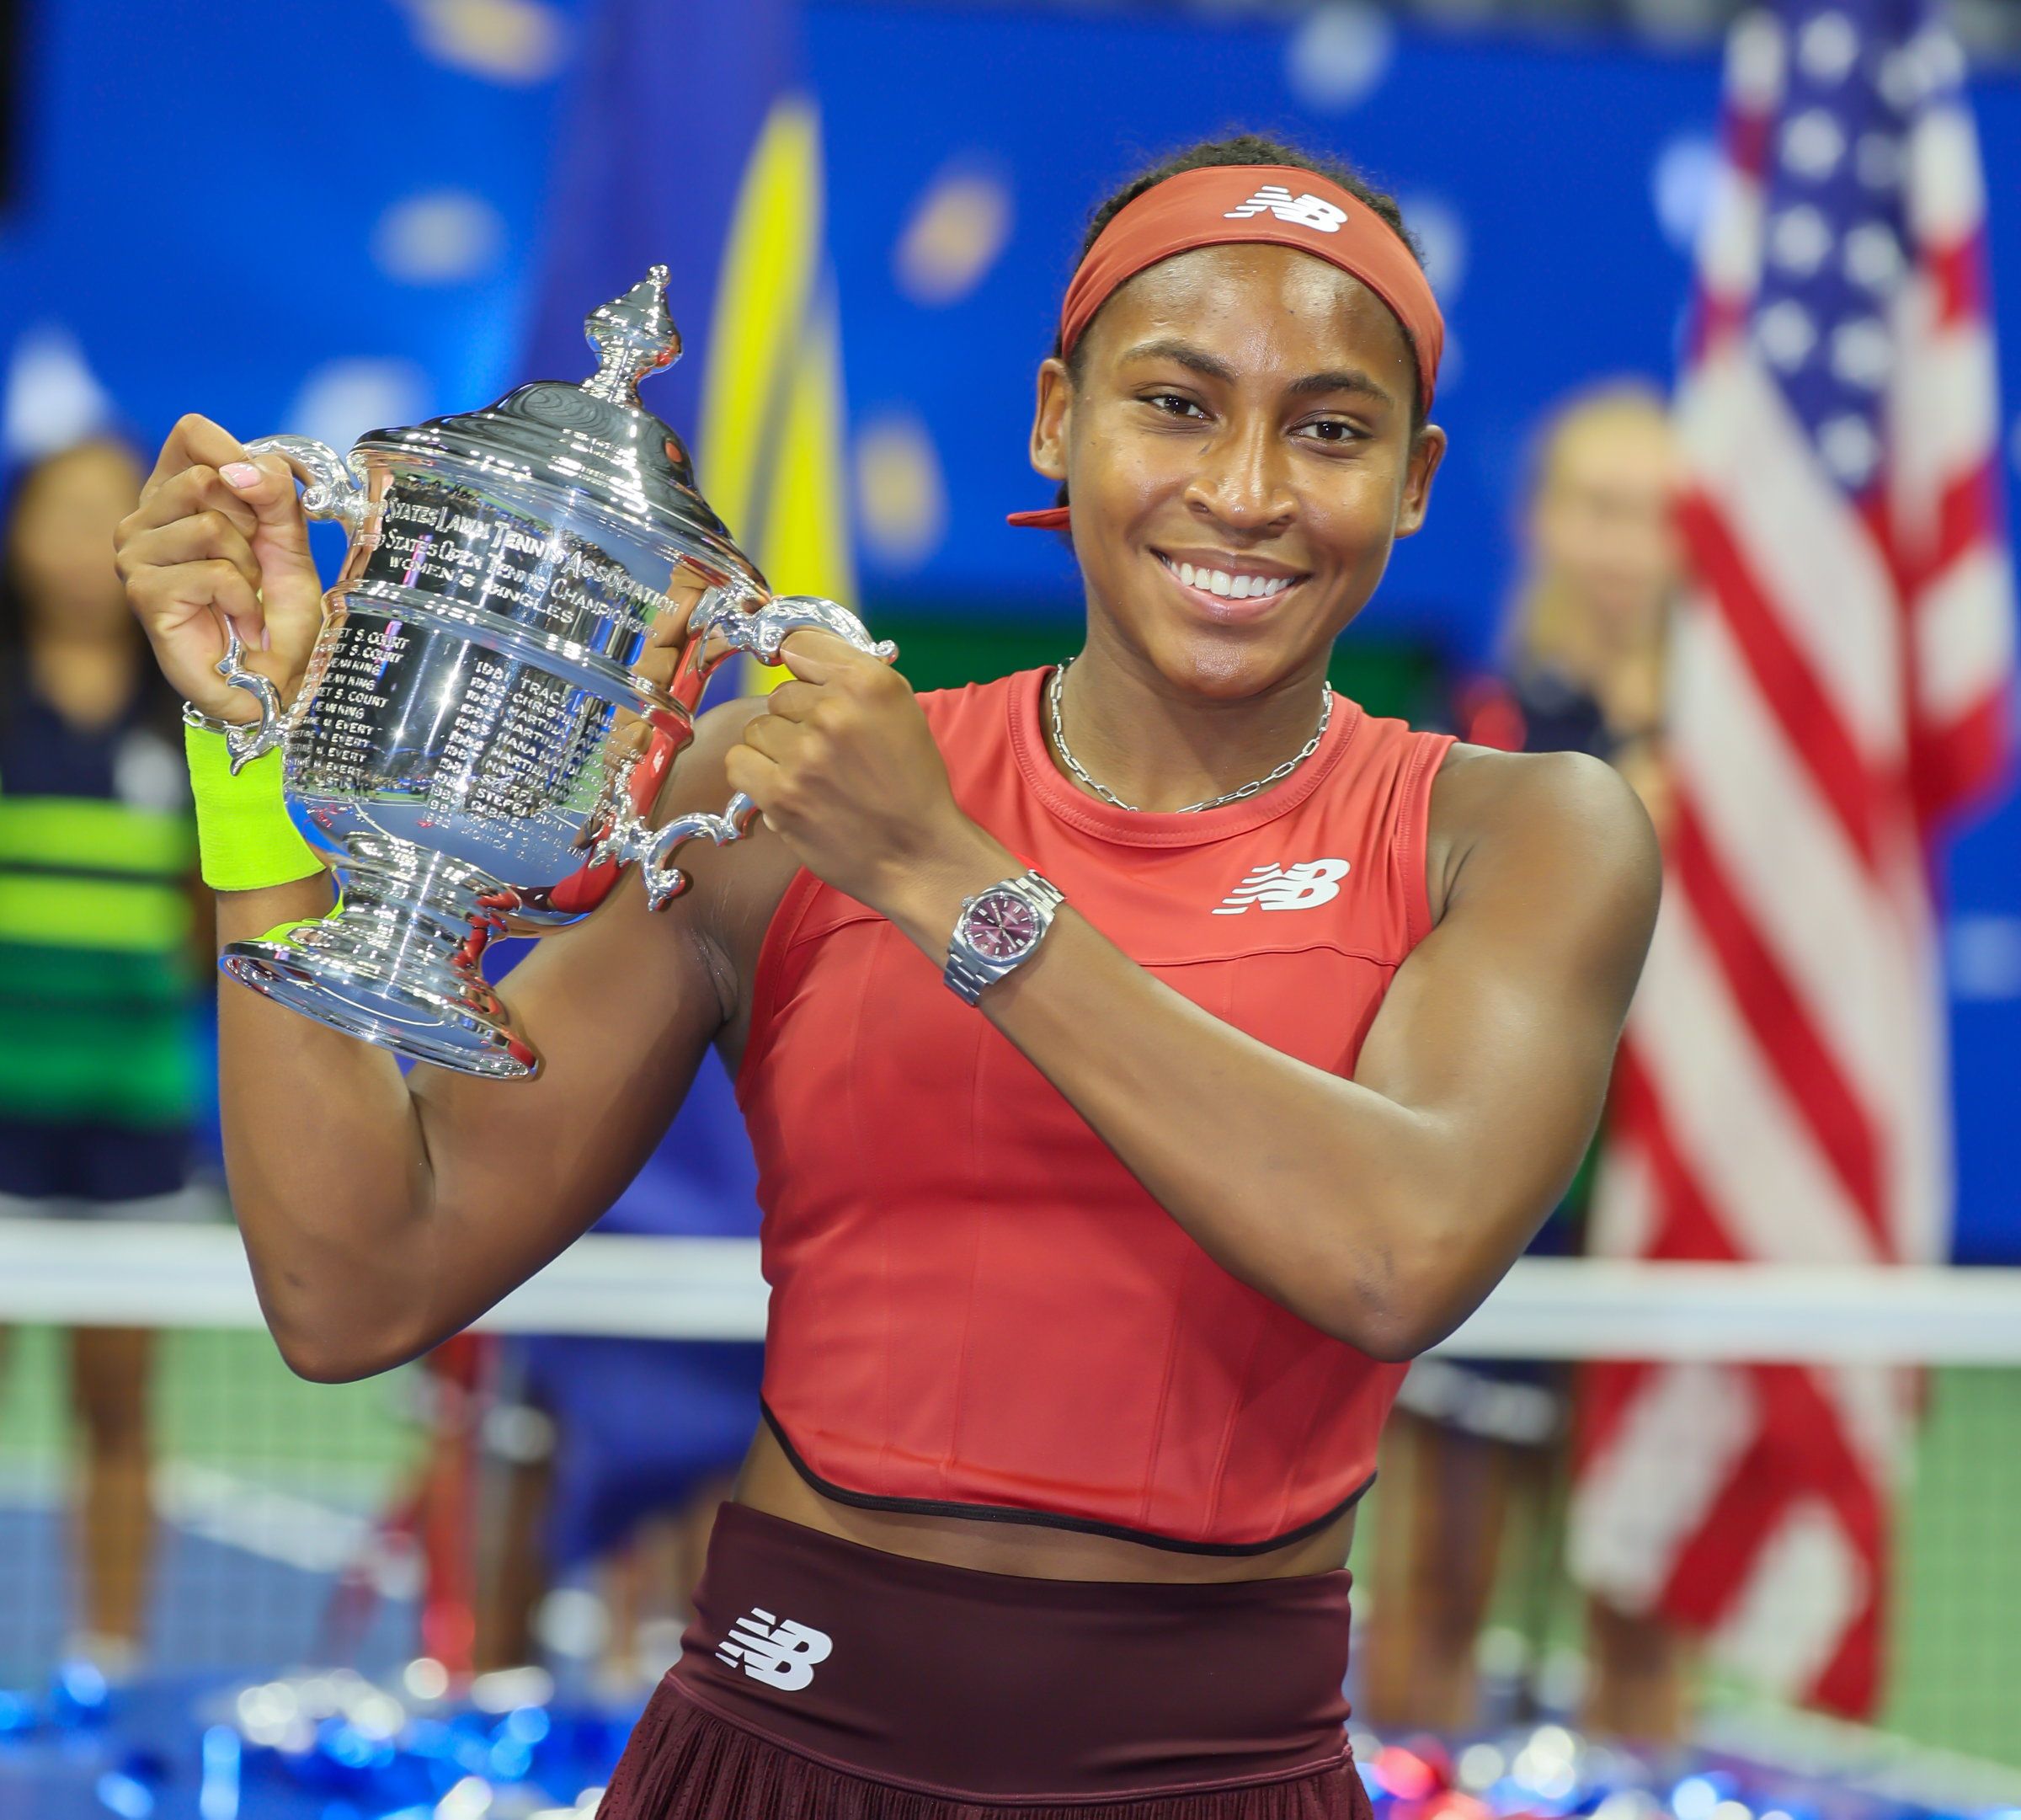 Top 10 youngest American Grand Slam winners: Where does Coco Gauff